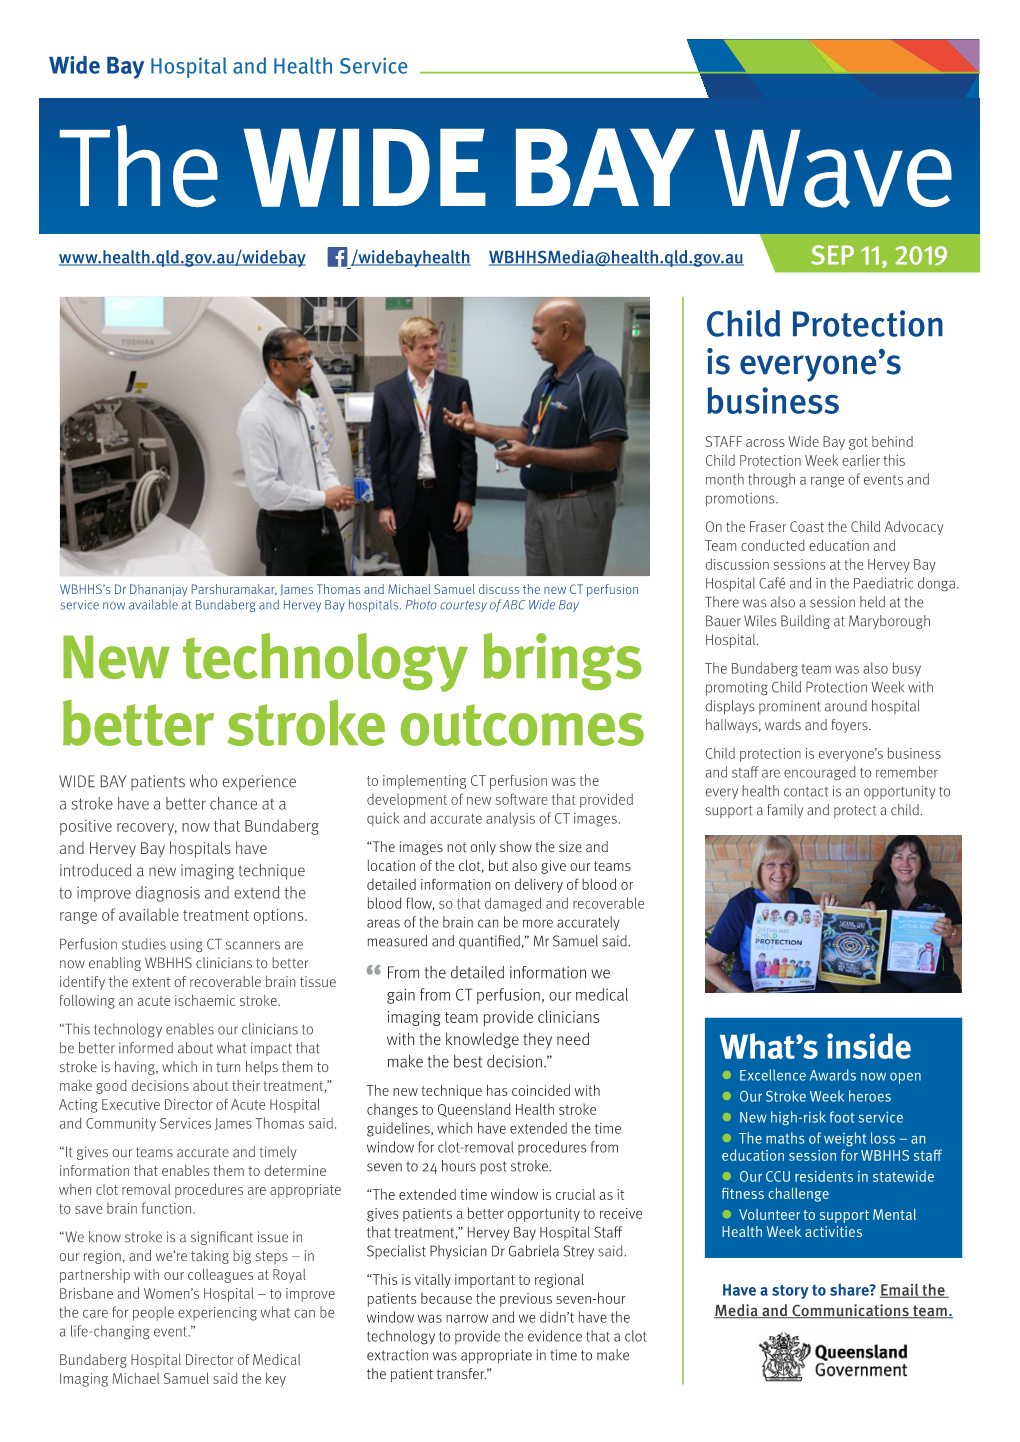 New Technology Brings Better Stroke Outcomes